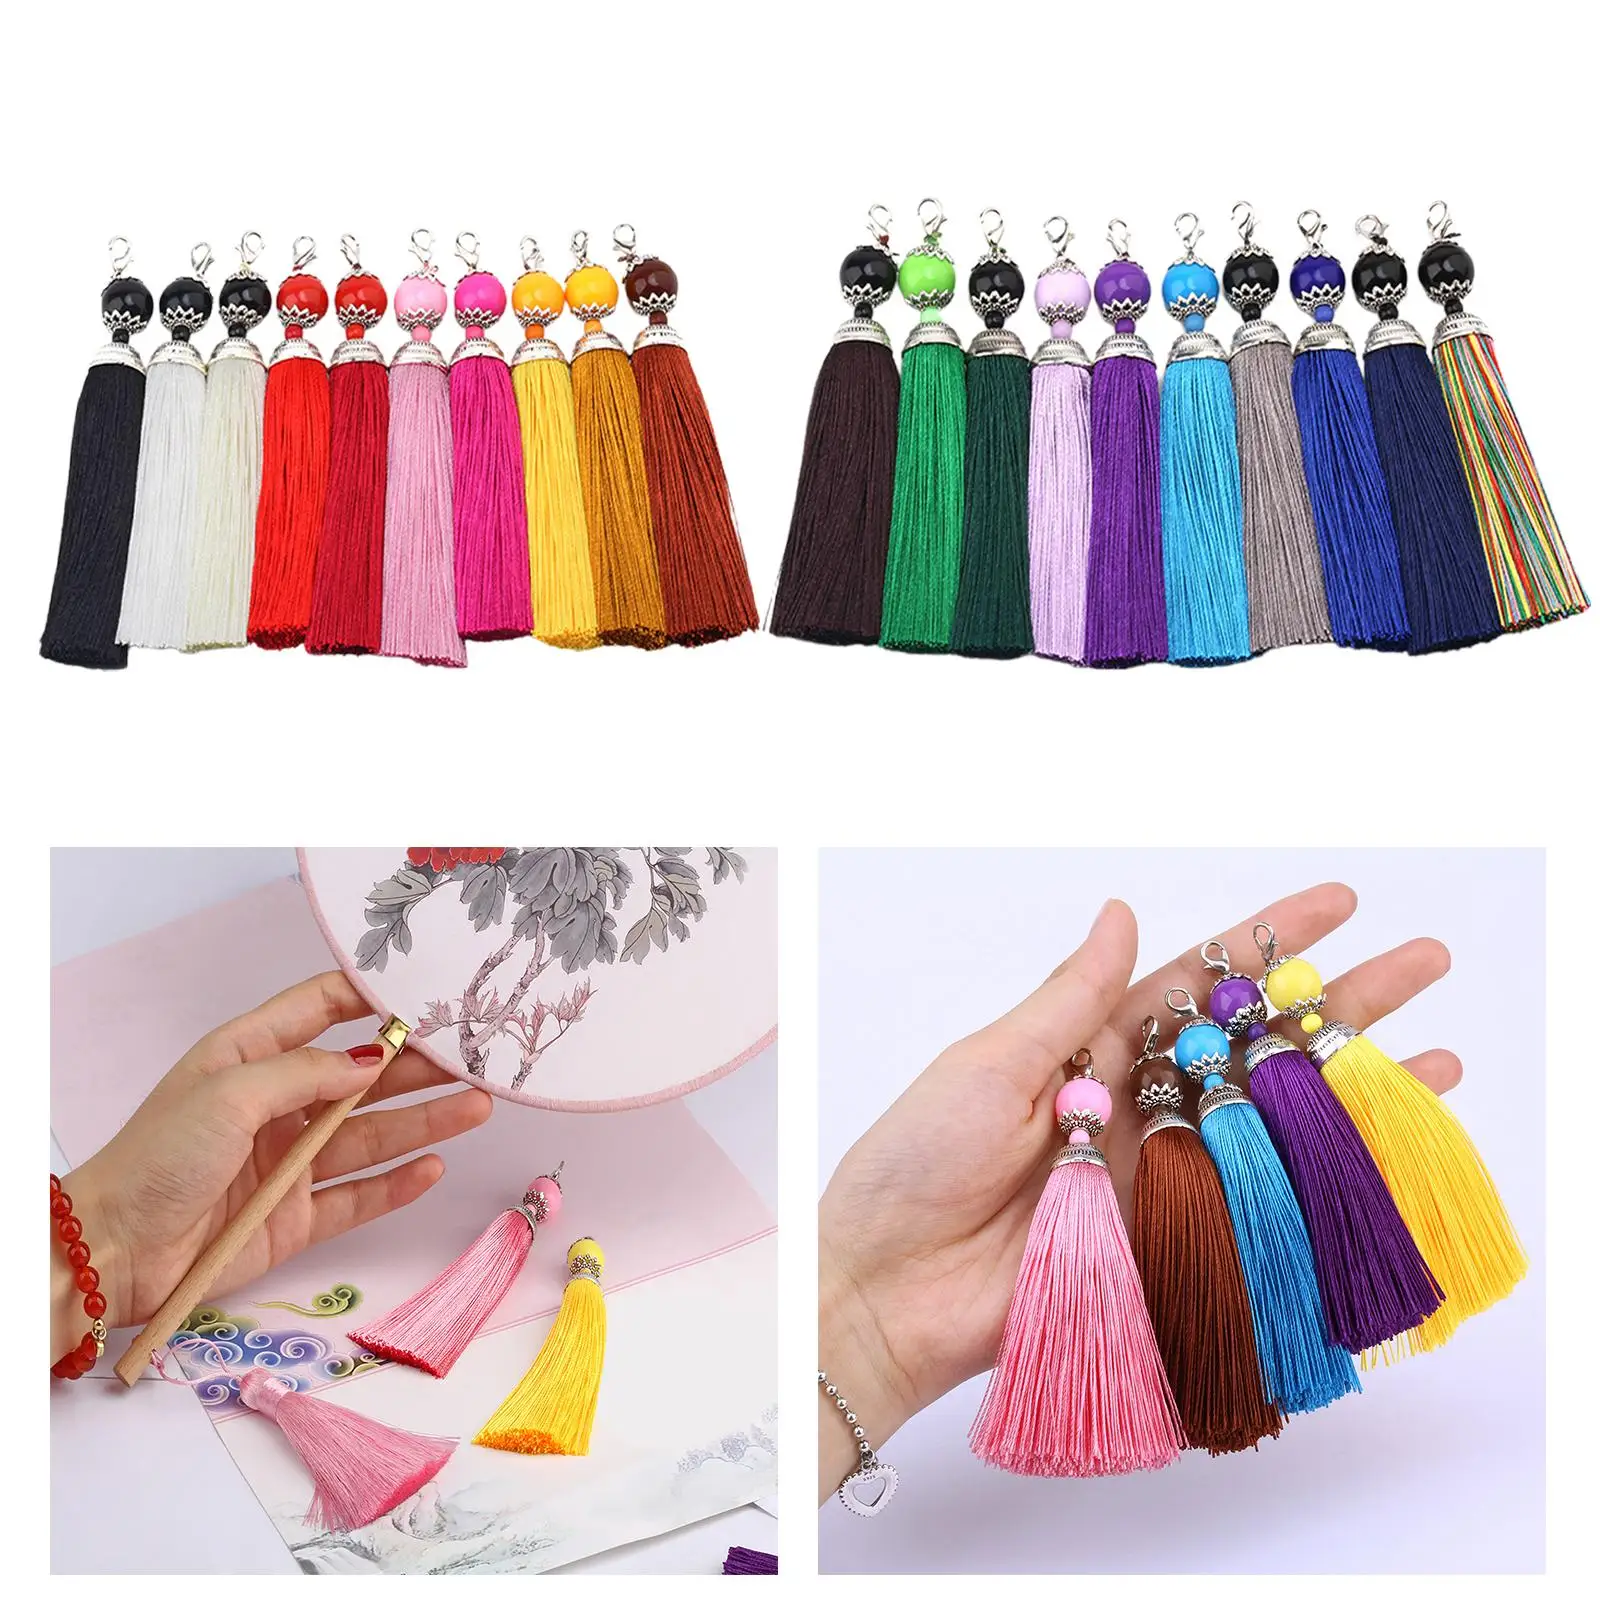 10x Tassels for Jewelry Making, with Lobster Buckle Decorative Handmade Tassels Decorative Tassels for Handbag Keychain Earrings